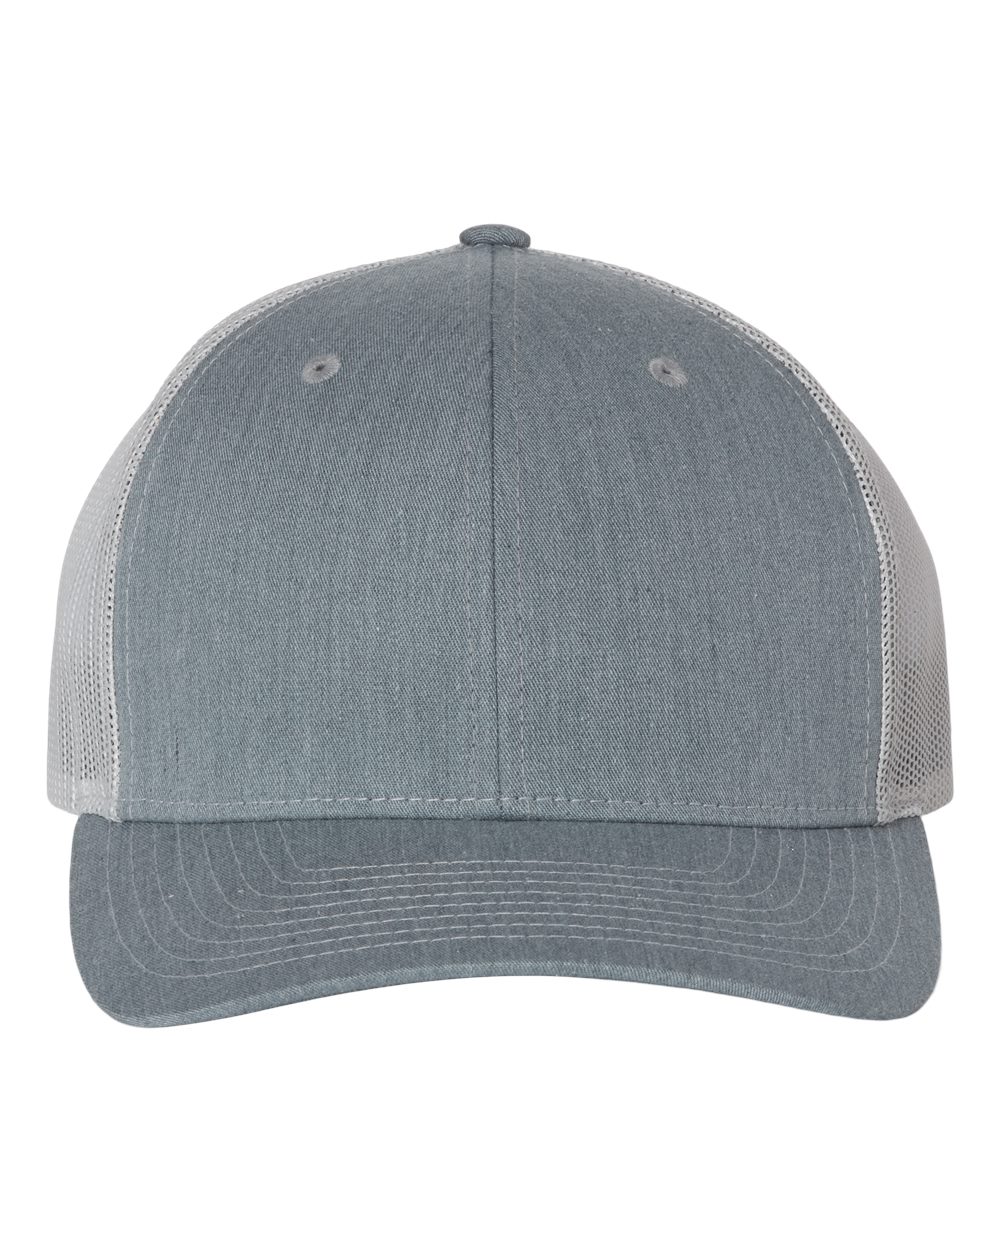 click to view Heather Grey/Light Grey